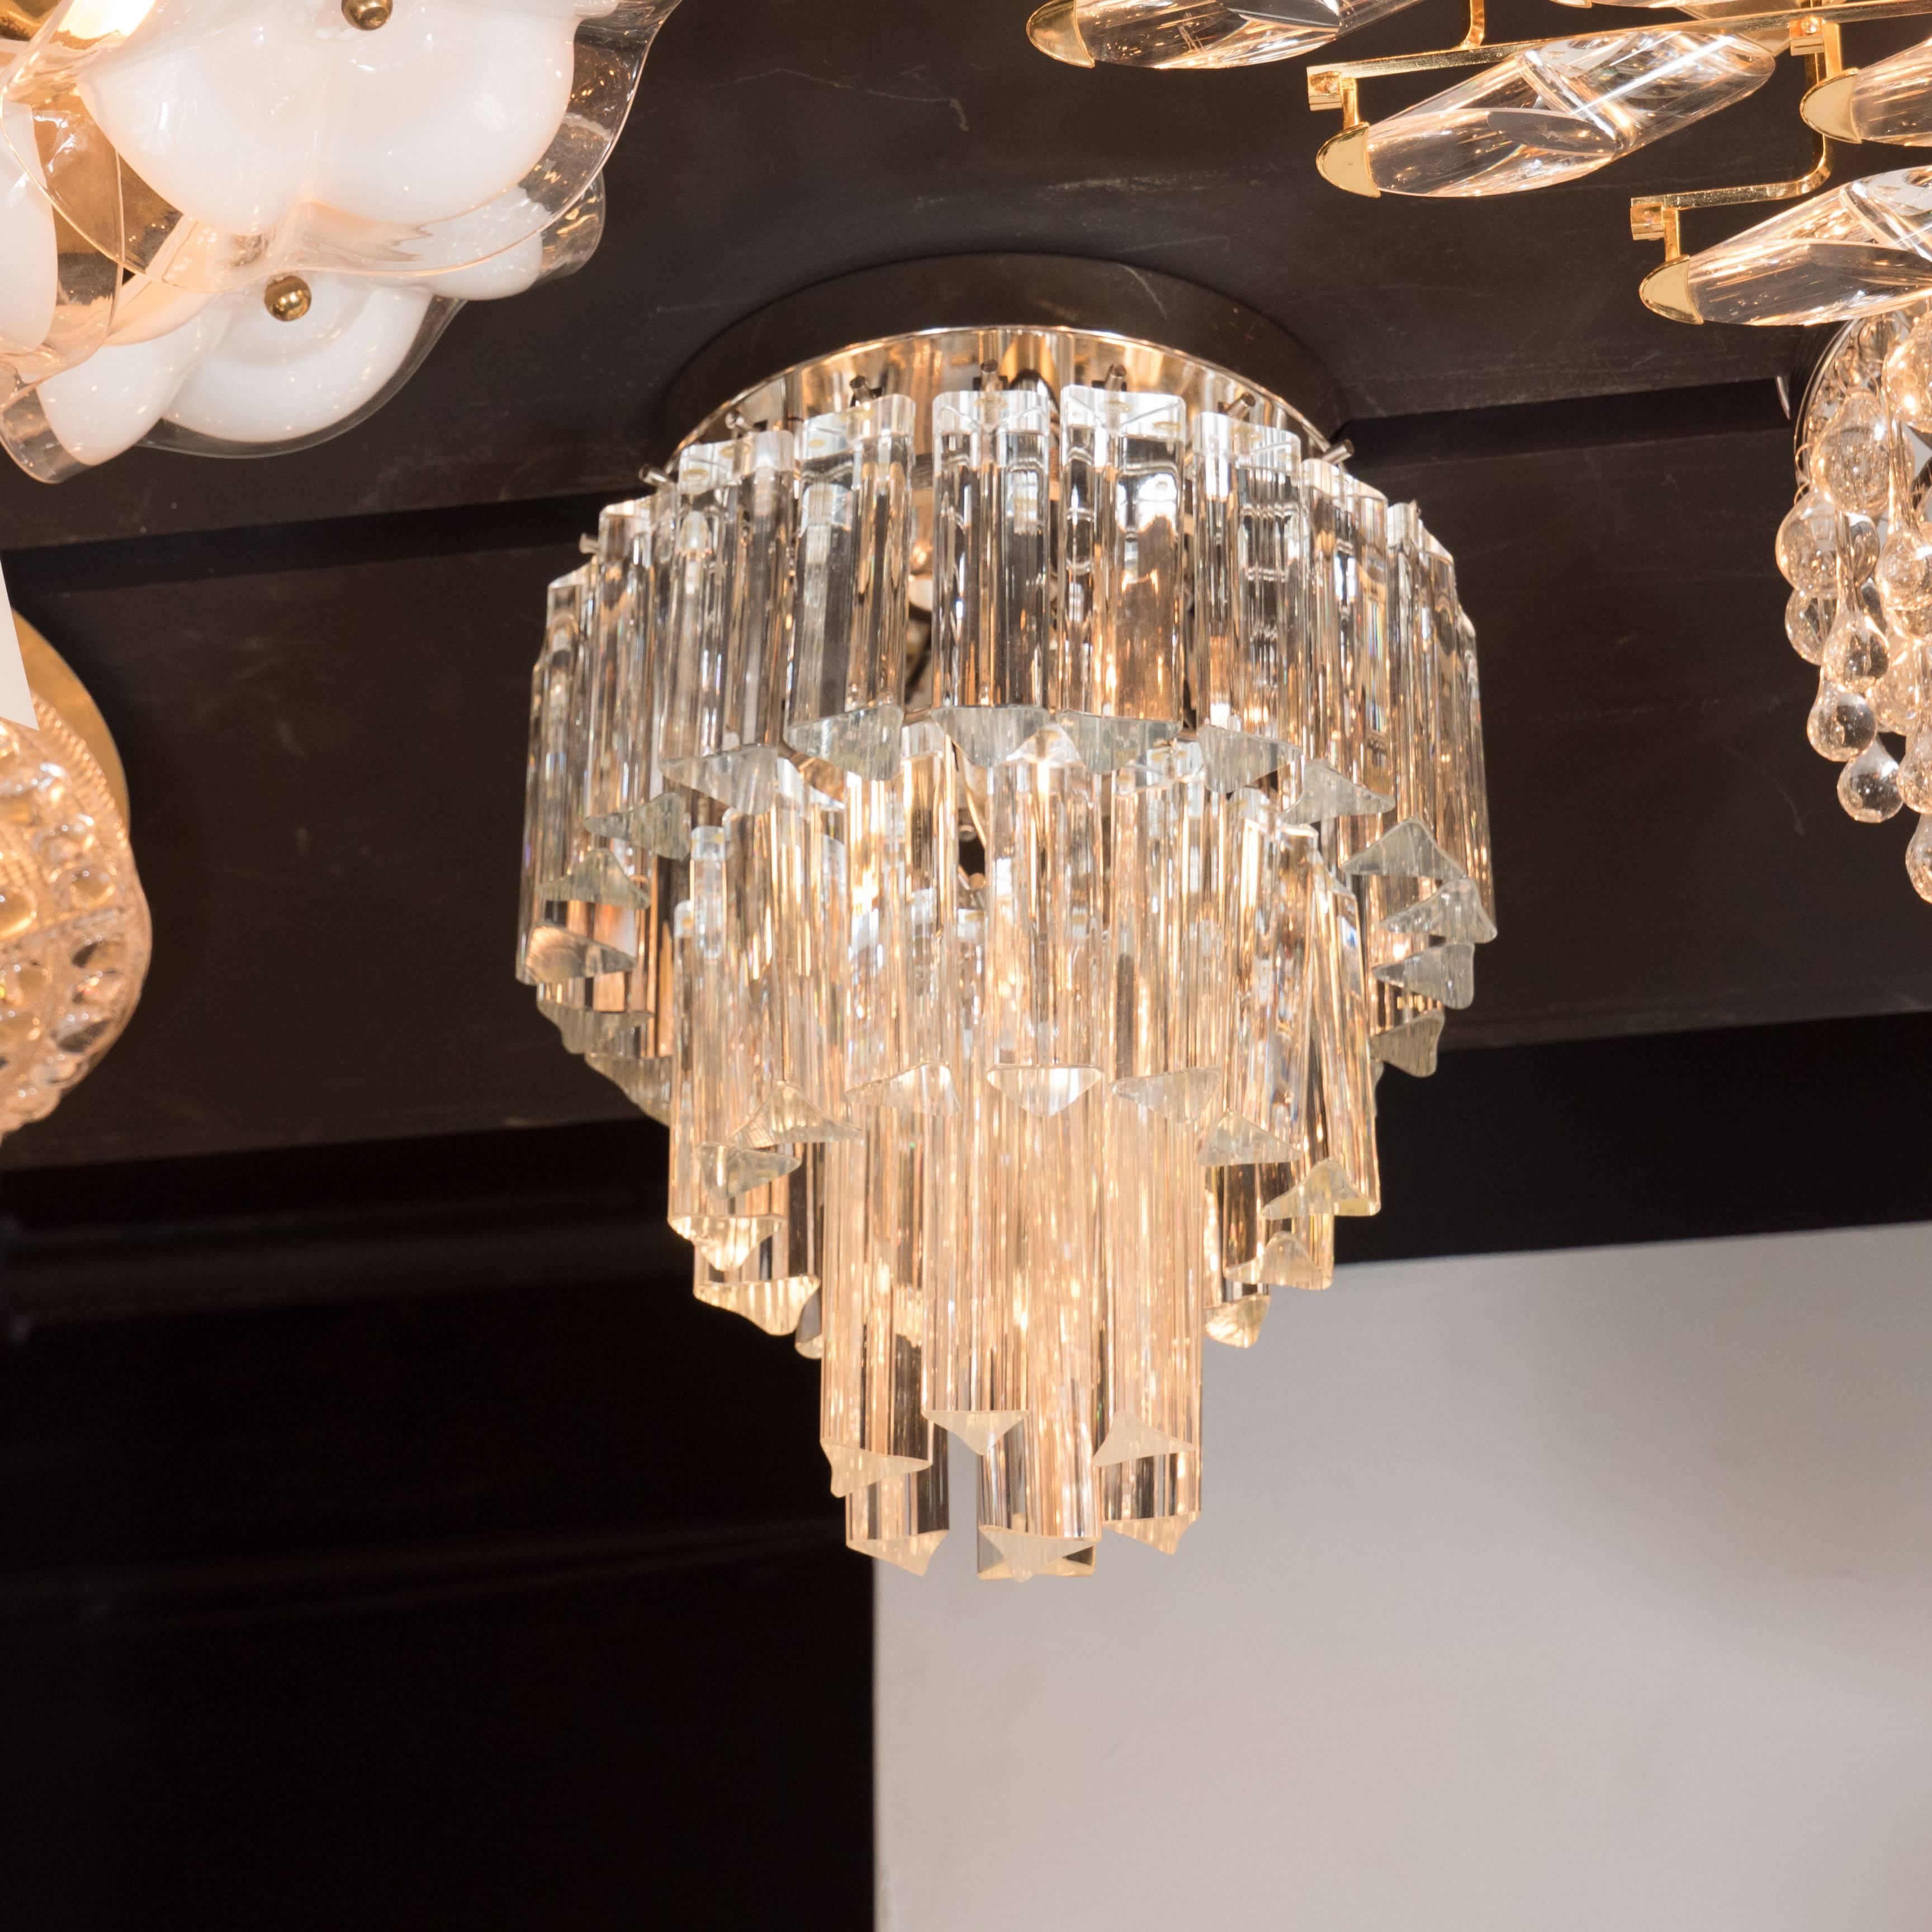 This very sophisticated flush mount chandelier features three tiers of high quality Camer Glass fitted on a chrome frame . It has been completely rewired and is fitted for three candelabra base bulbs that can be 60 watts each, so a total of 180